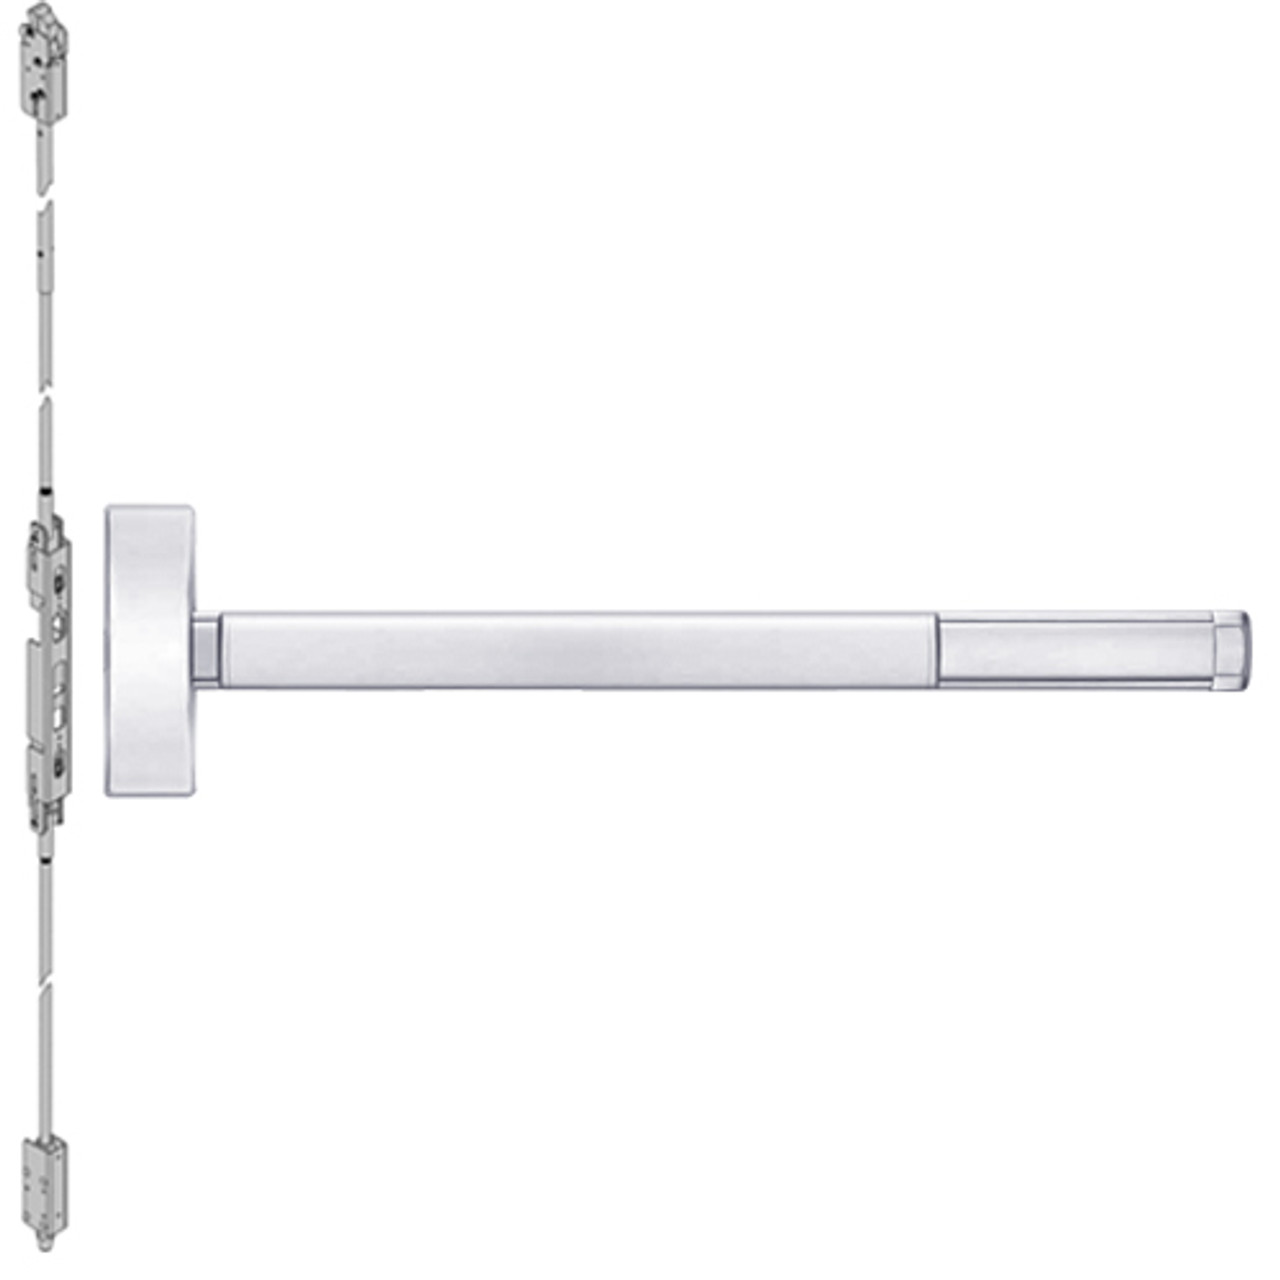 ELRFL2808-625-36 PHI 2800 Series Fire Rated Concealed Vertical Rod Exit Device with Electric Latch Retraction Prepped for Key Controls Lever-Knob in Bright Chrome Finish